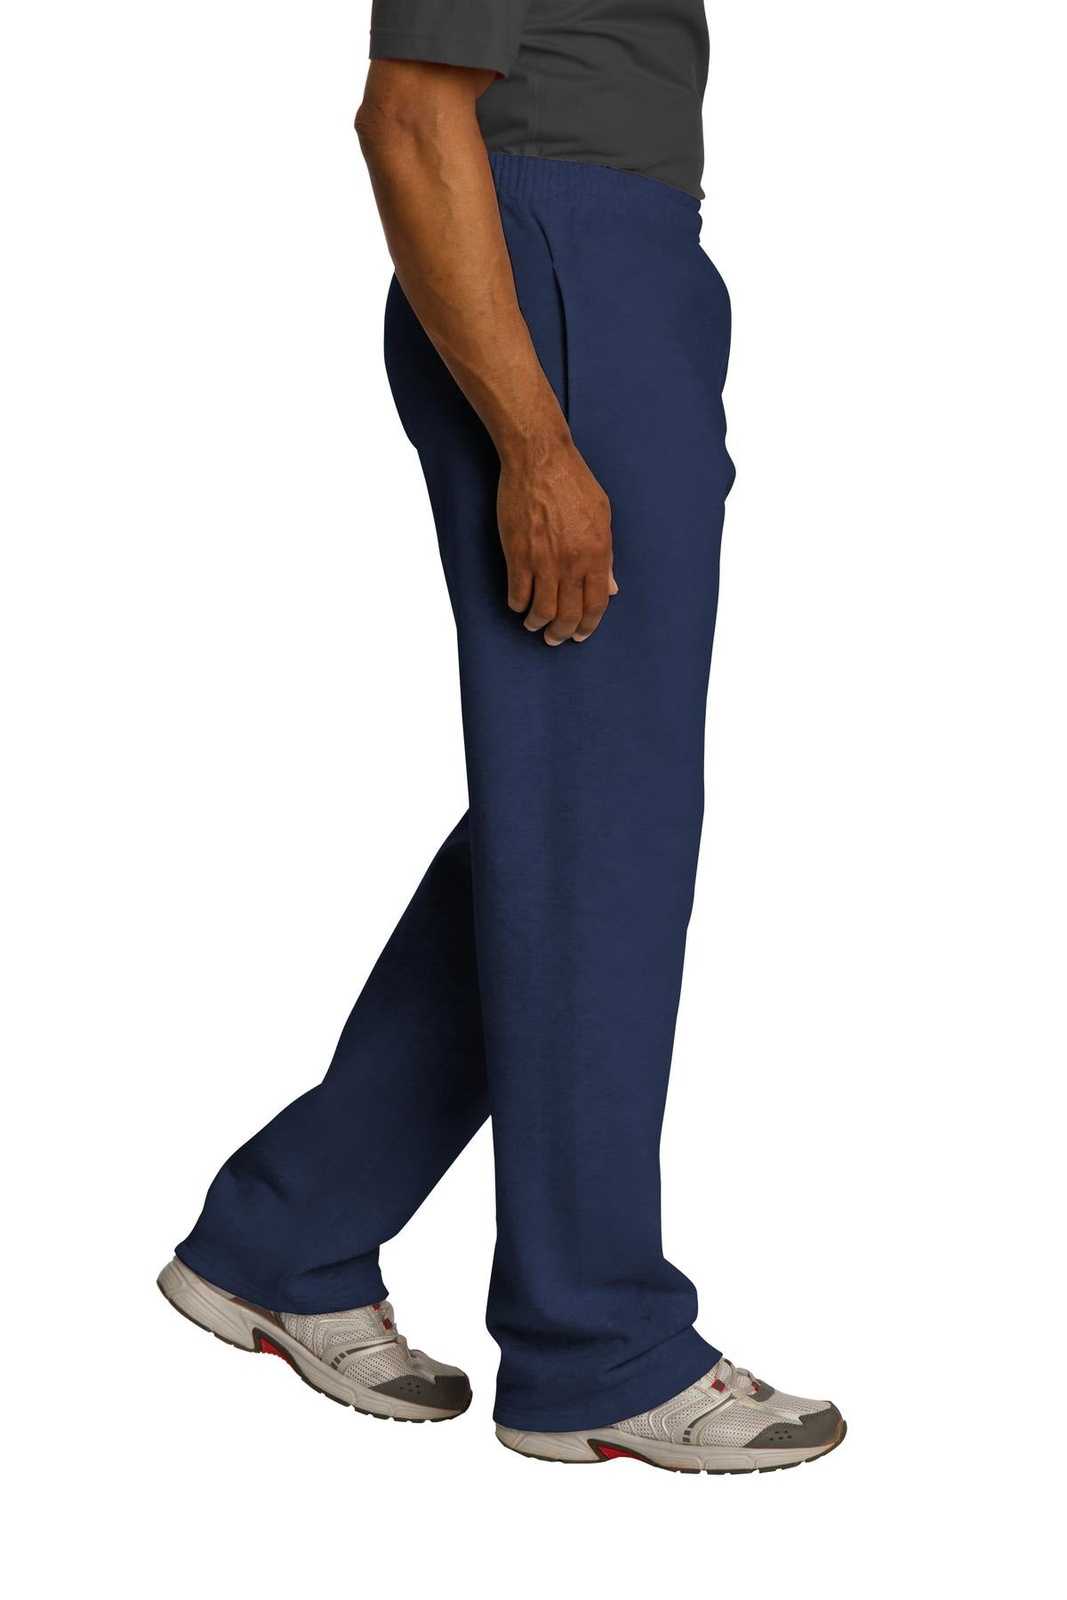 Jerzees 974MP Nublend Open Bottom Pant with Pockets - Navy - HIT a Double